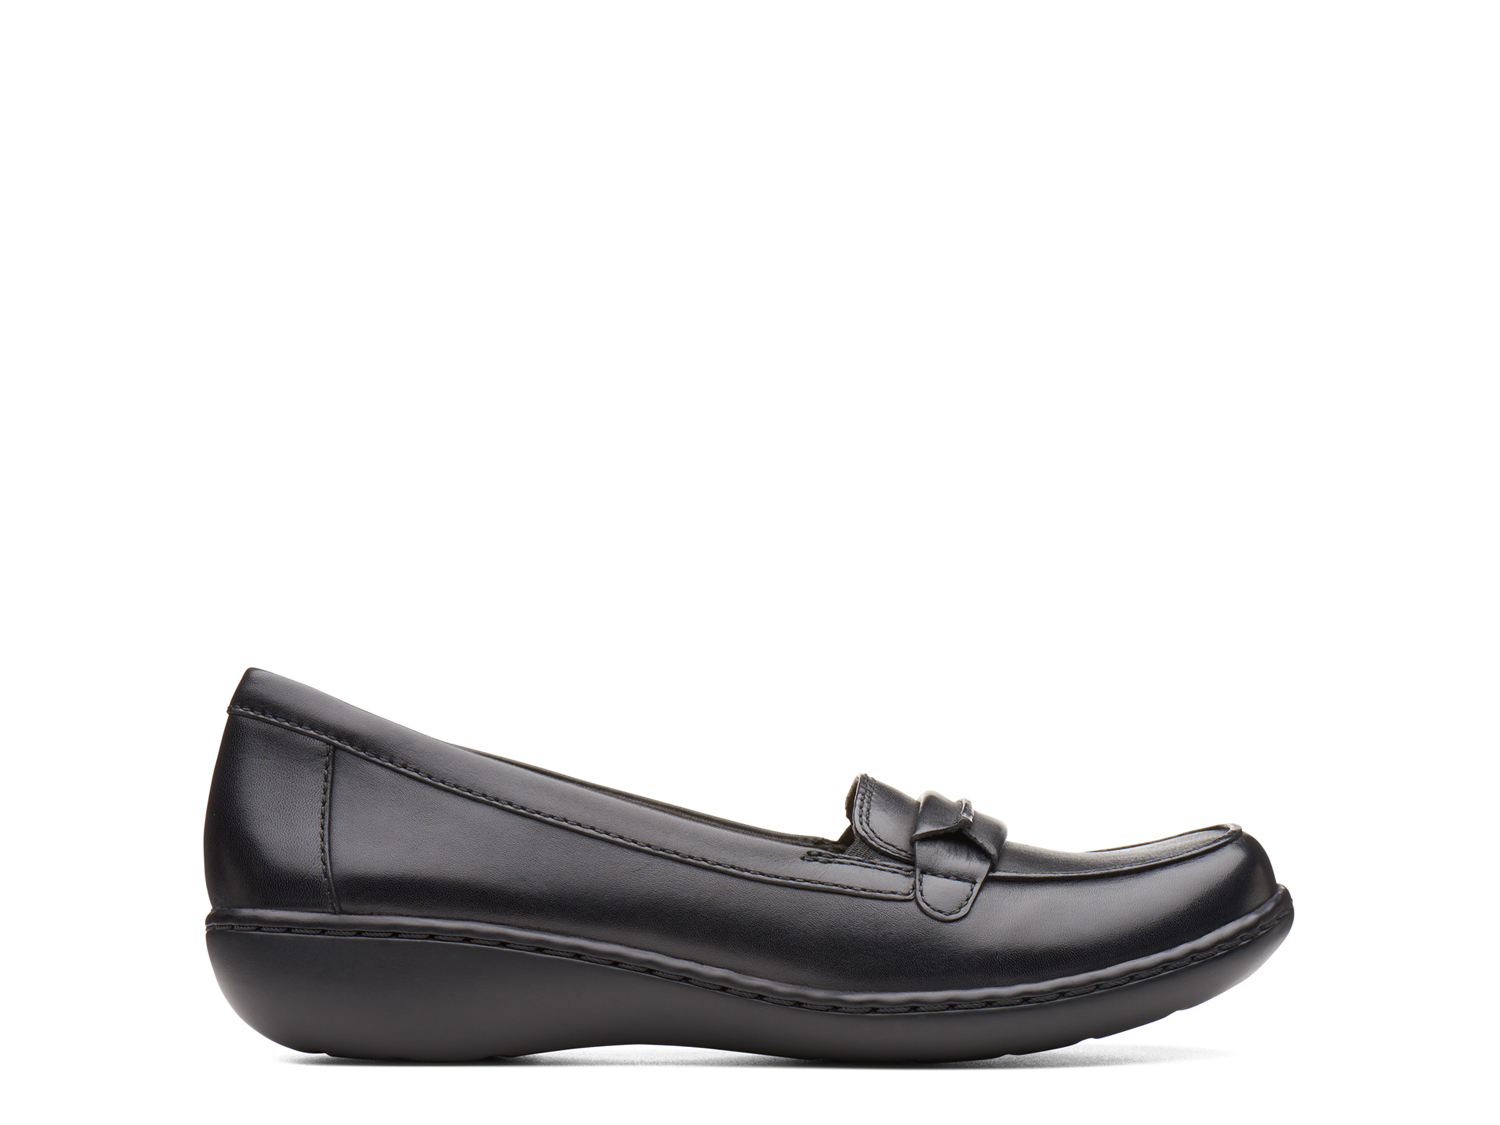 Details about   Ladies Clarks Casual Loafer Style Slip-On Shoes 'Ashland Lily'